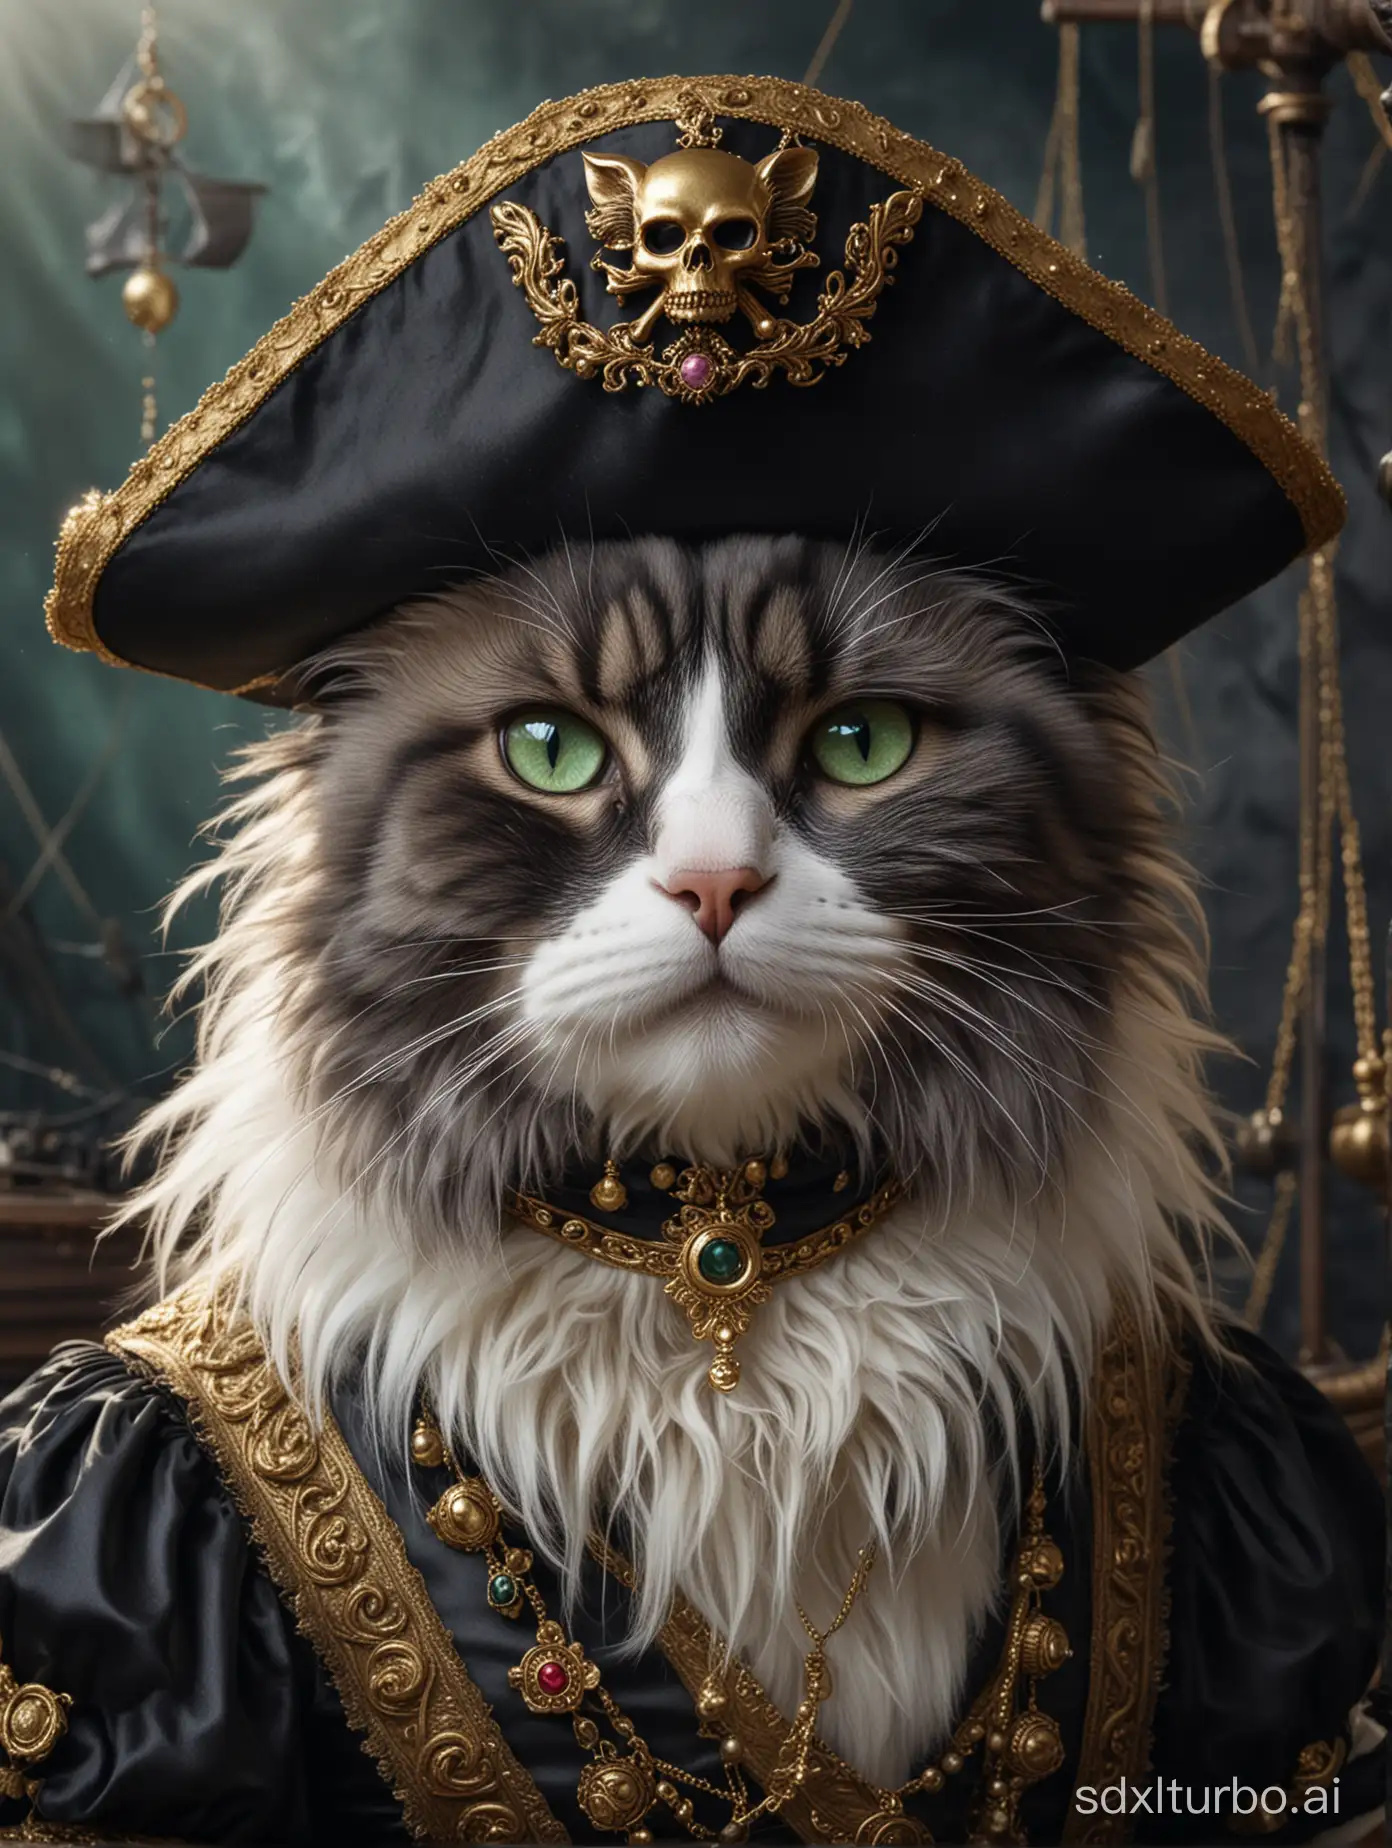 The pirate costume of Captain Puppet Cat is adorned with exquisite celestial jewels and sparkling gold ornaments, emitting an aura of aristocratic plunder. Her luxurious fur shines with deep ebony and silver tones, meticulously groomed yet displaying traces of a seafaring life. This striking image is a digitally rendered painting, capturing every intricate detail in high definition. The captain wears a tricorn hat, her emerald eyes sharp as they gaze outward, concealing beneath her mischievous exterior a noble elegance that draws people's attention. The composition skillfully balances grandeur with ruggedness, inviting the audience to delve into the mysterious tale of feline pirates' magnificent adventures.